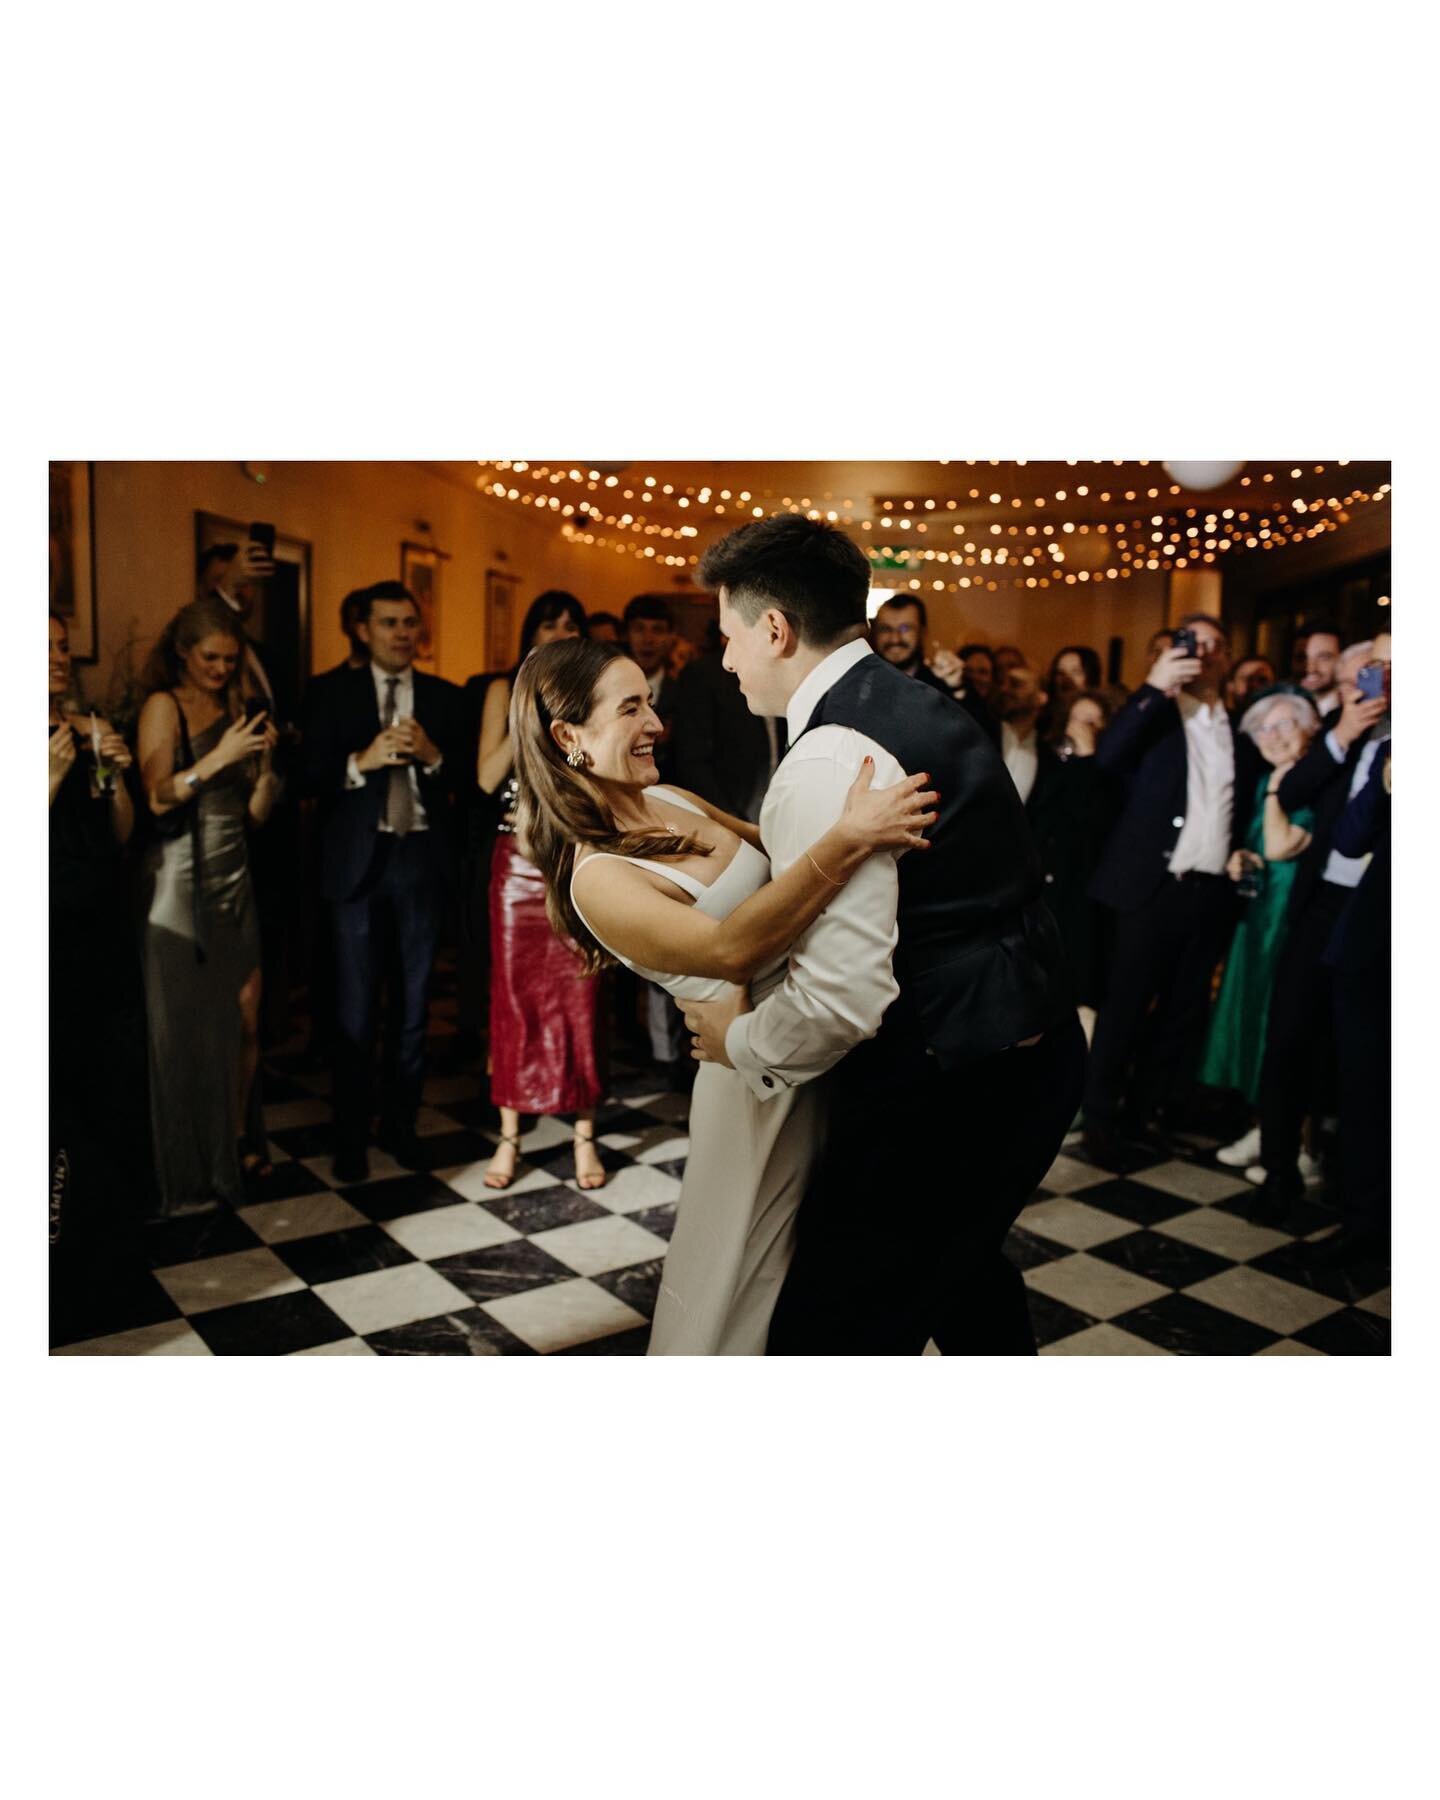 Epic scenes from the dance floor and party of Rebecca &amp; Ollie&rsquo;s wonderful winter wedding at The Royal Inn on the park in Hackney 🙌 This wedding had everything I love most about weddings - the day was relaxed, fun and effortlessly stylish, 